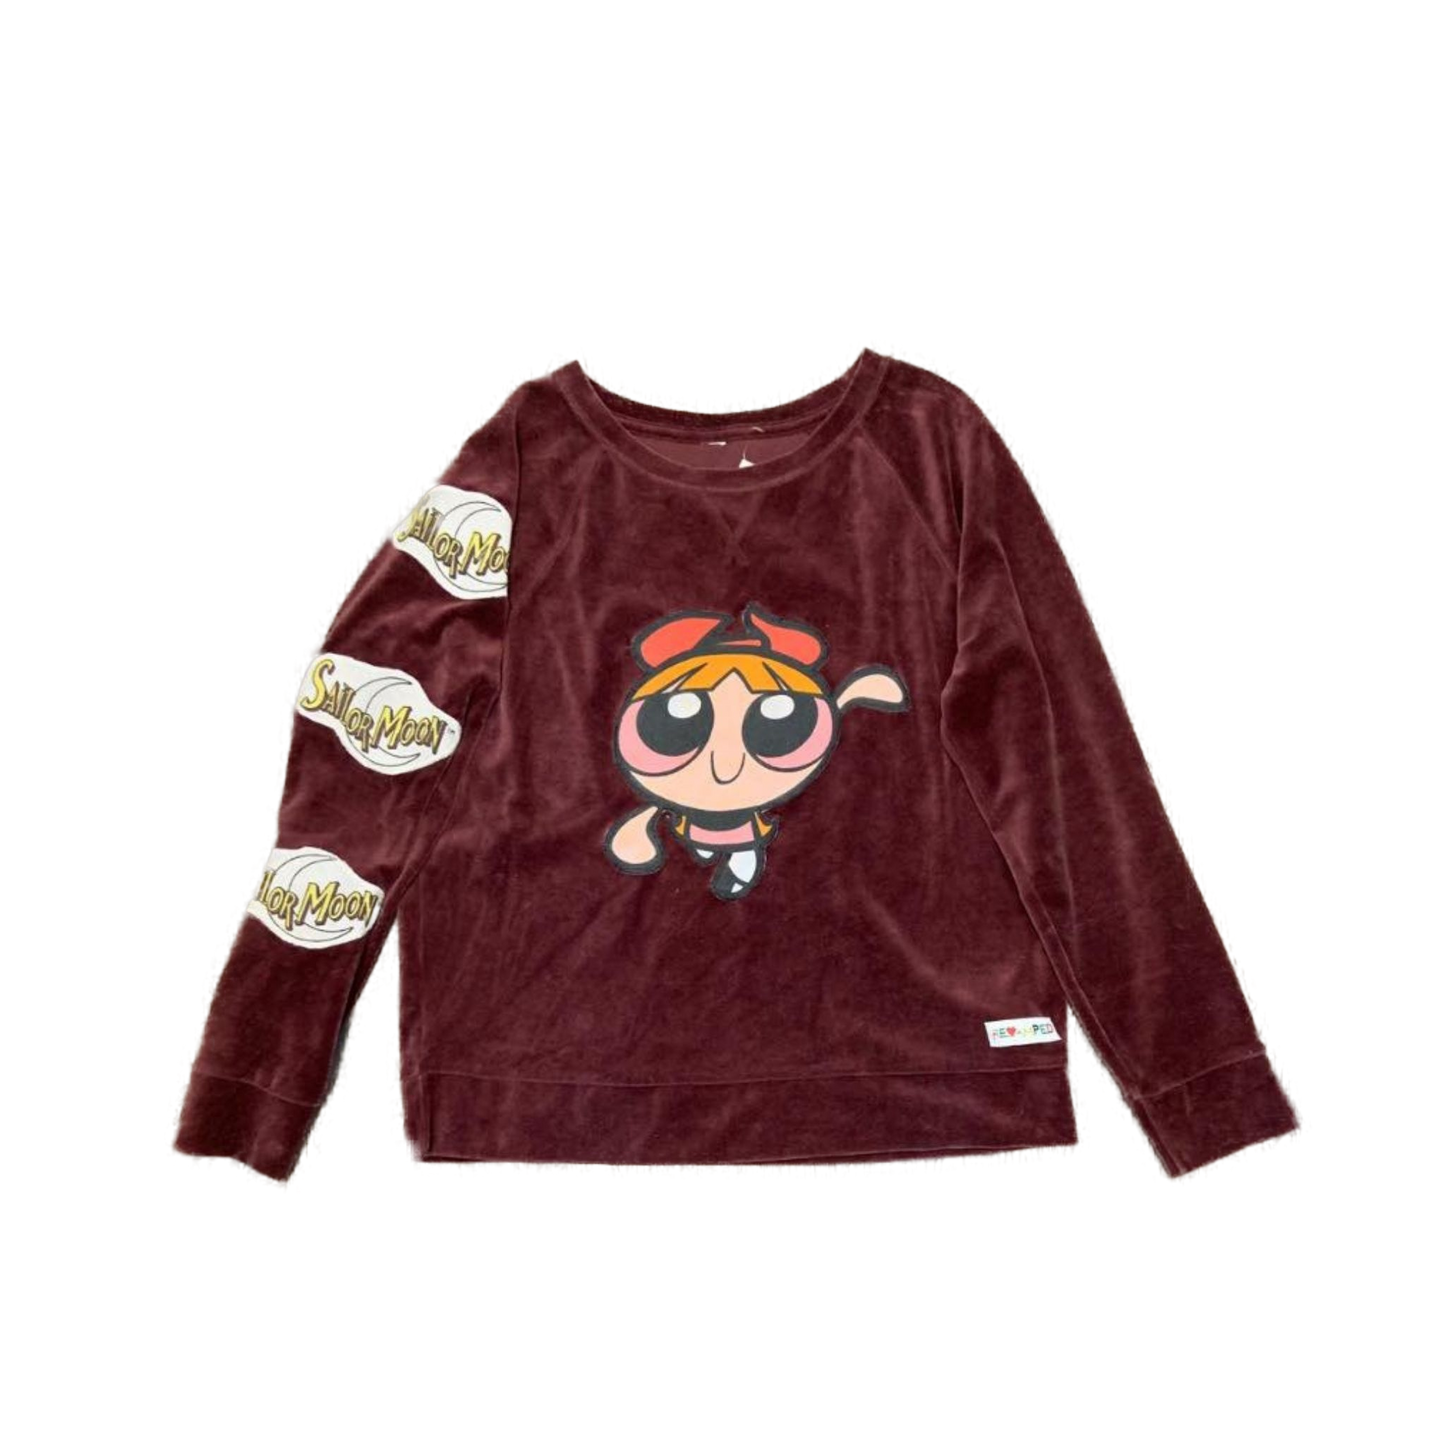 Maroon "Sailormoon" and "Powerpuff girls" Revamped sweater. Alterations available.